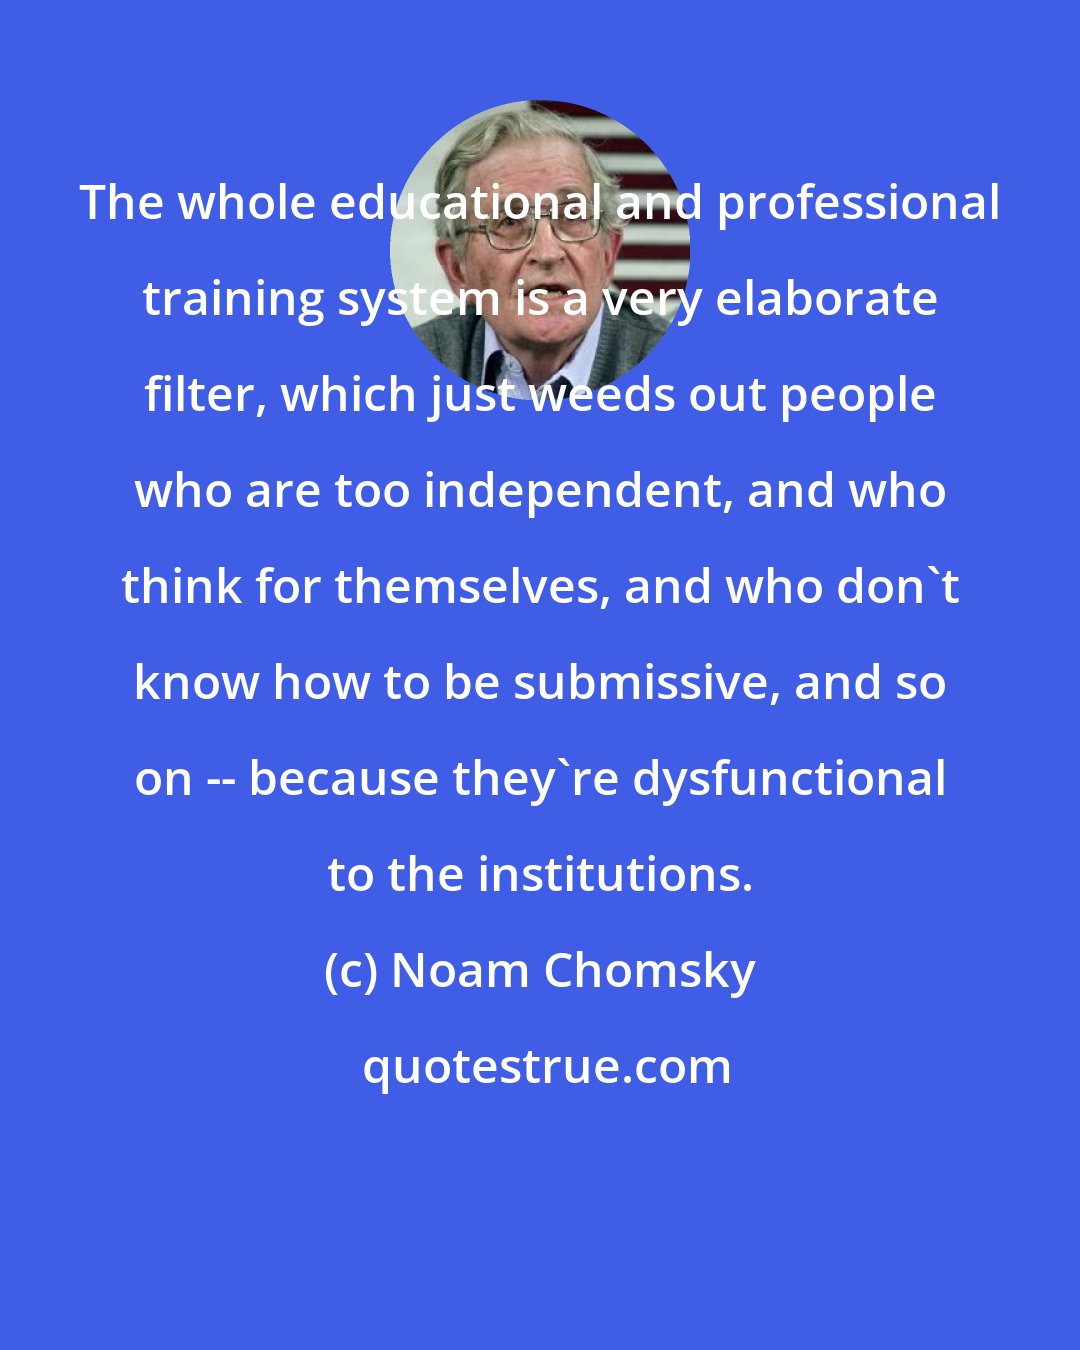 Noam Chomsky: The whole educational and professional training system is a very elaborate filter, which just weeds out people who are too independent, and who think for themselves, and who don't know how to be submissive, and so on -- because they're dysfunctional to the institutions.